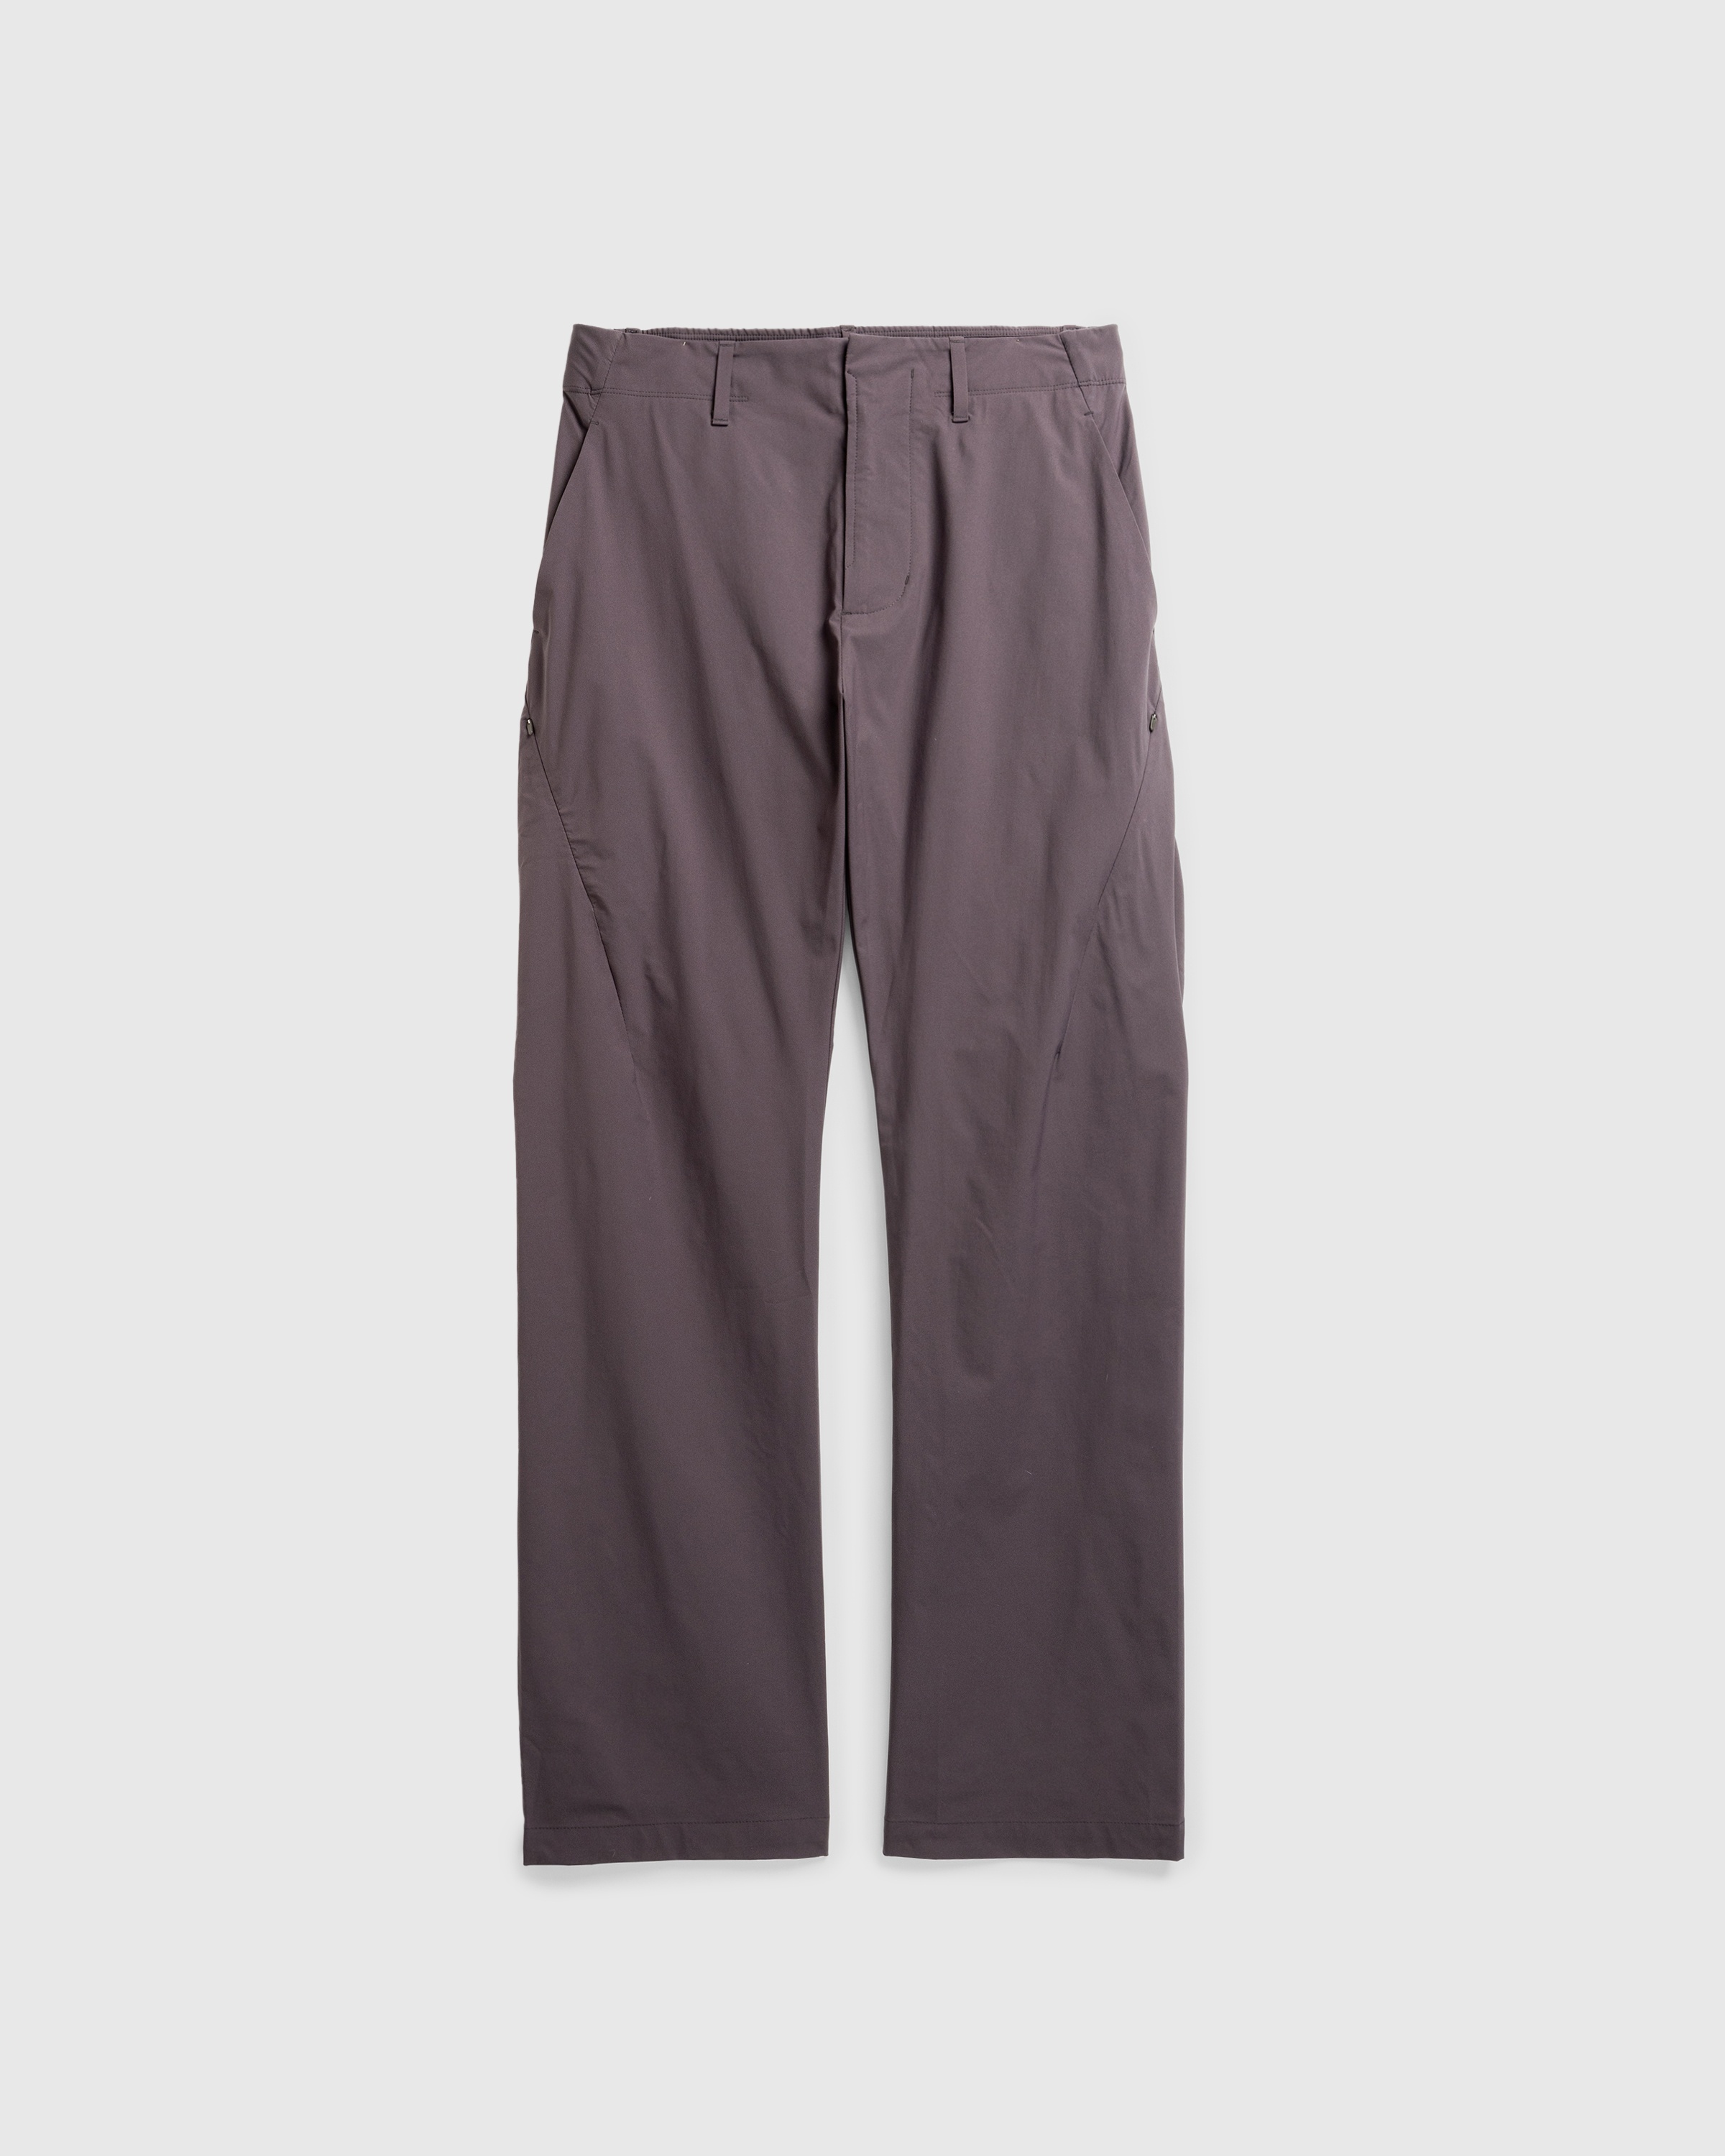 Post Archive Faction (PAF) – 6.0 Technical Pants Right Brown - 1